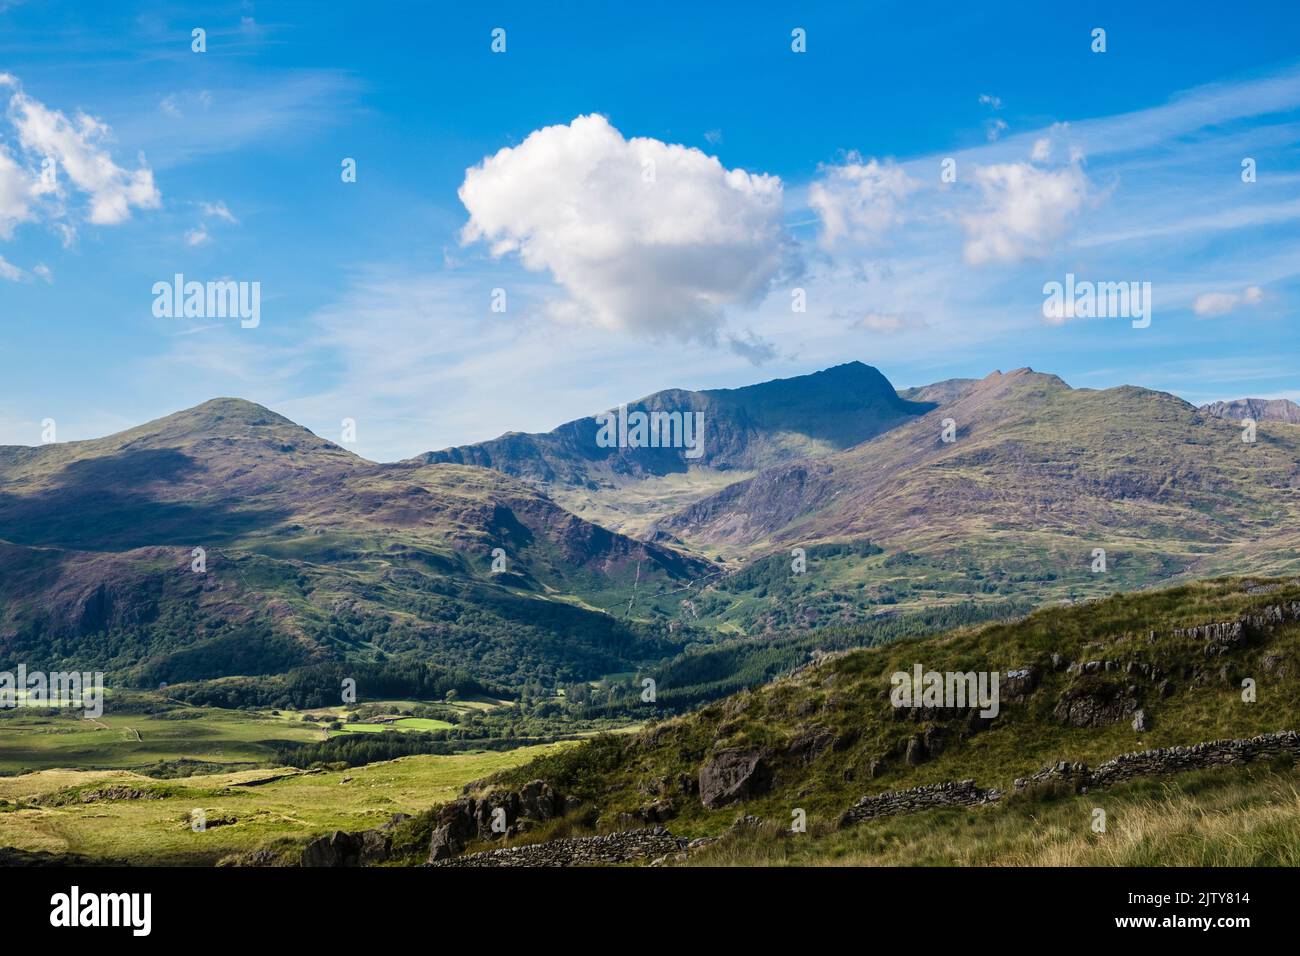 Yr Aran and the mt Snowdon horseshoe across Nant Gwynant valley from the lower slopes of Cnicht. Beddgelert, Gwynedd, north Wales, UK, Britain Stock Photo